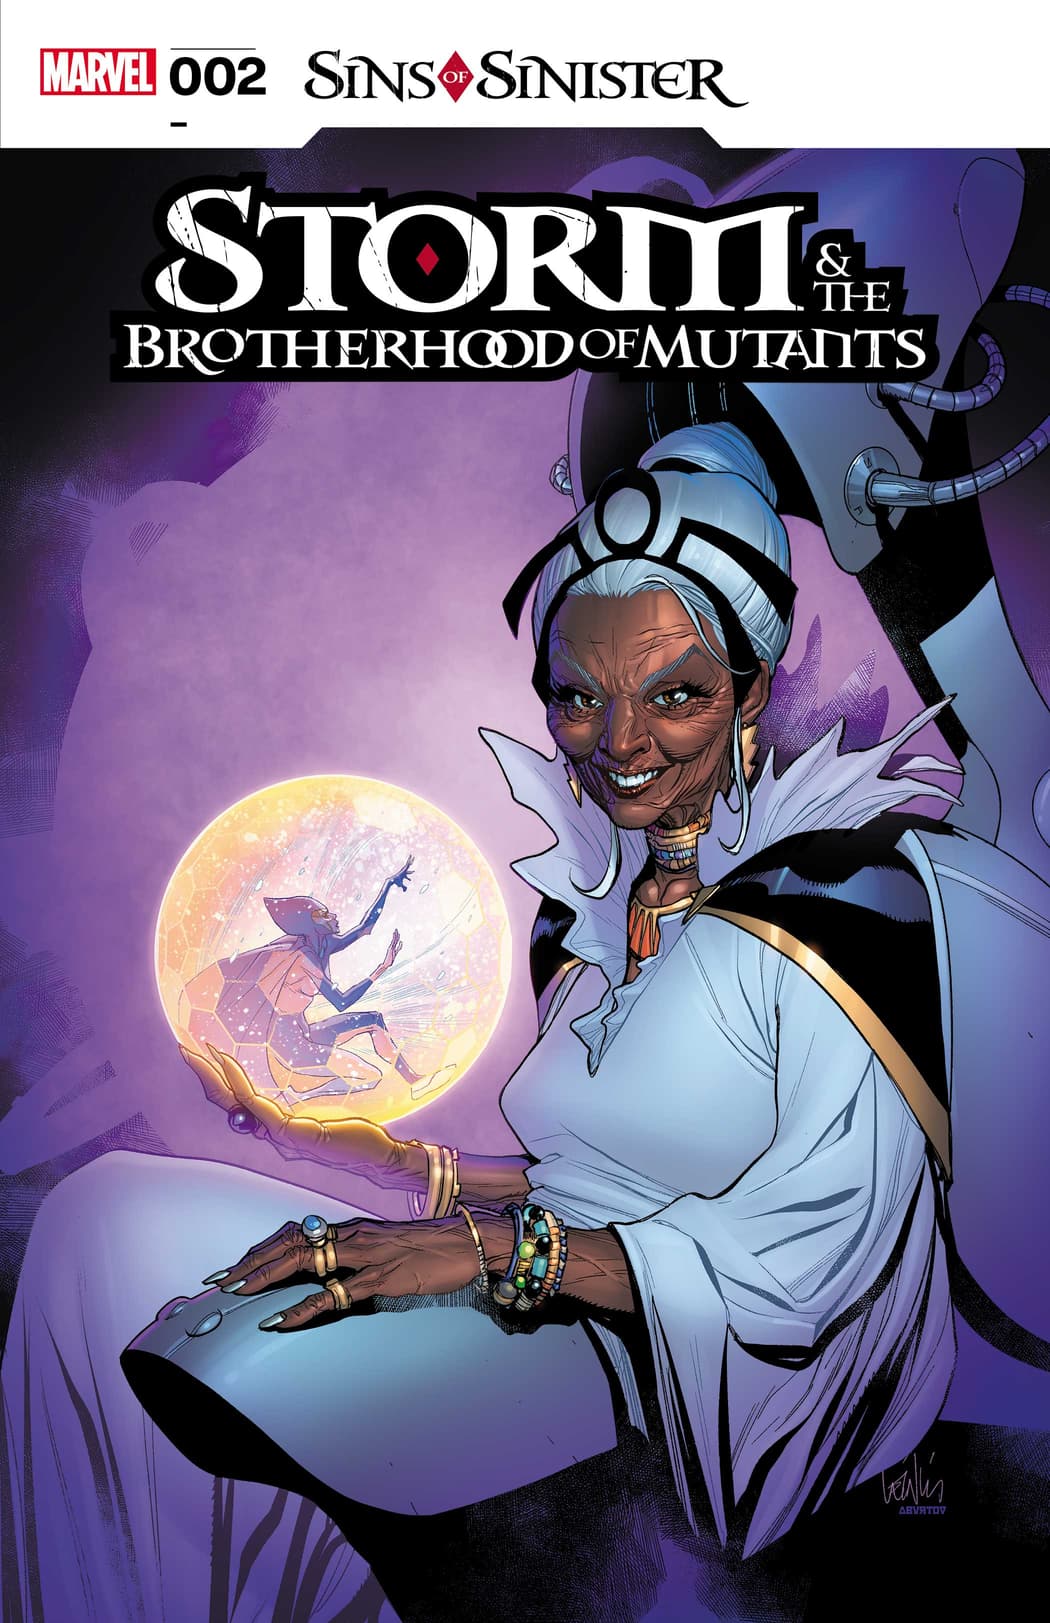 STORM & THE BROTHERHOOD #2 Cover by Leinil Francis Yu